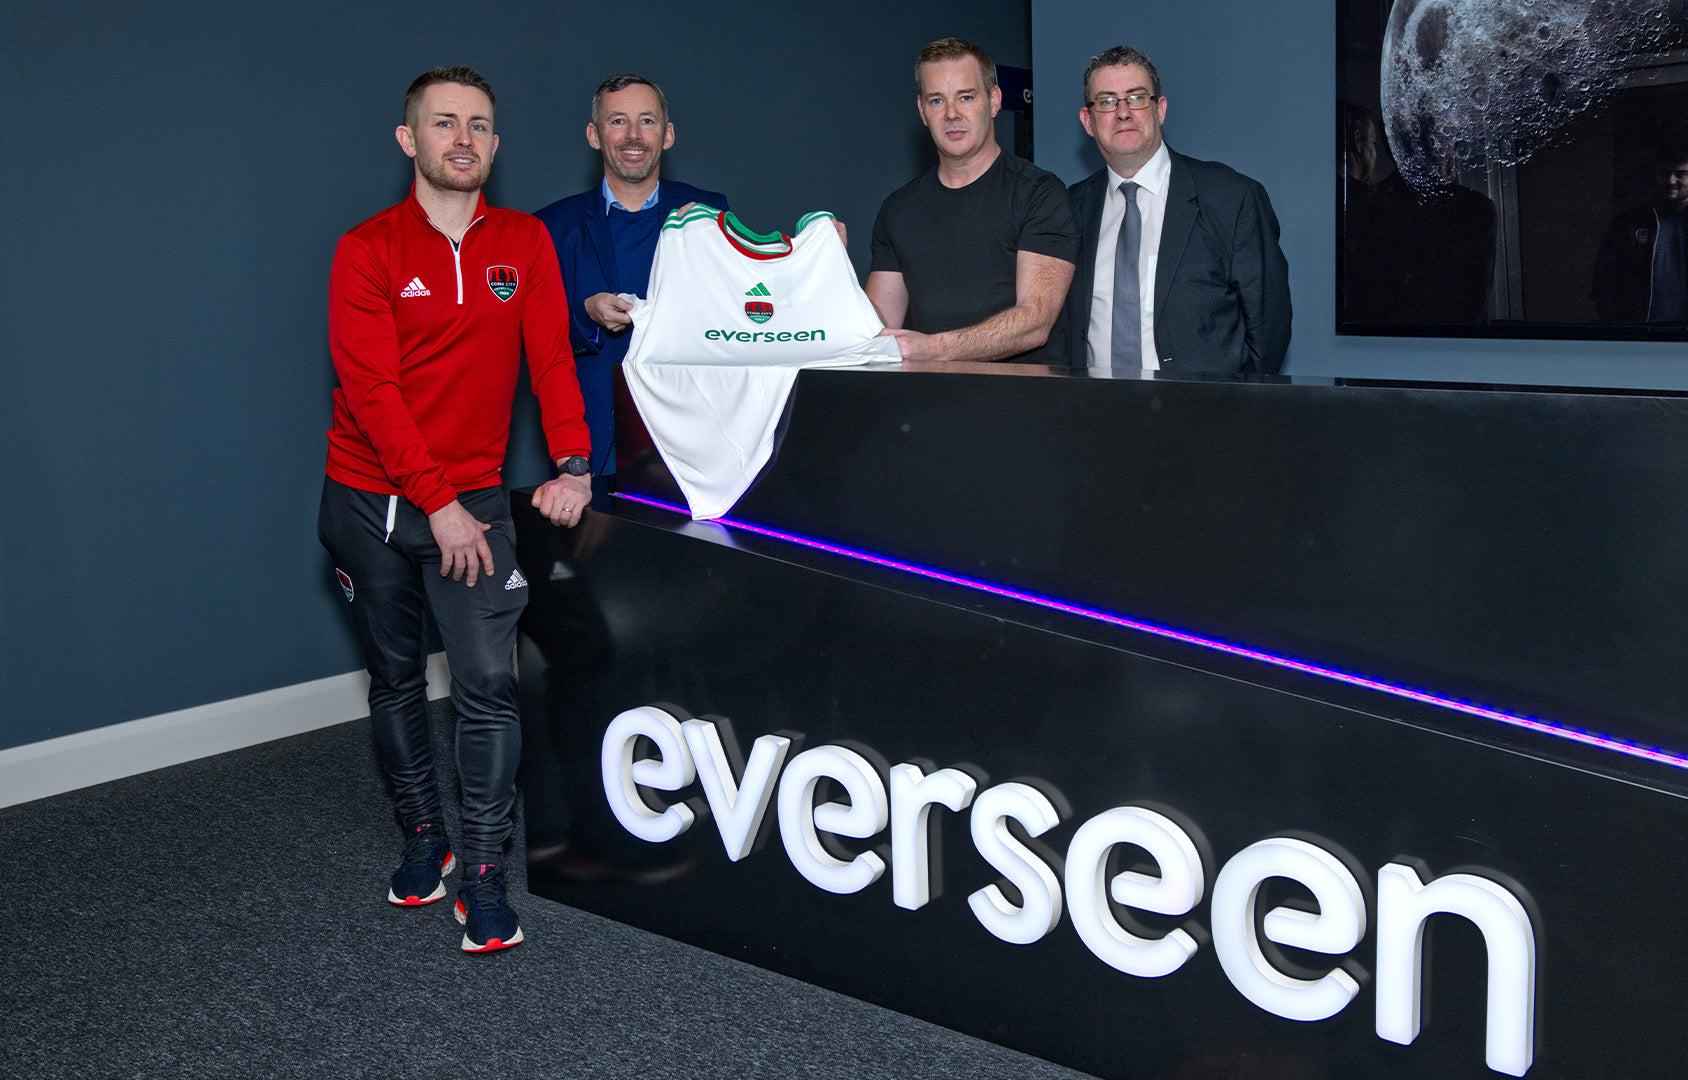 Everseen Become Main Sponsor of Academy Sides!